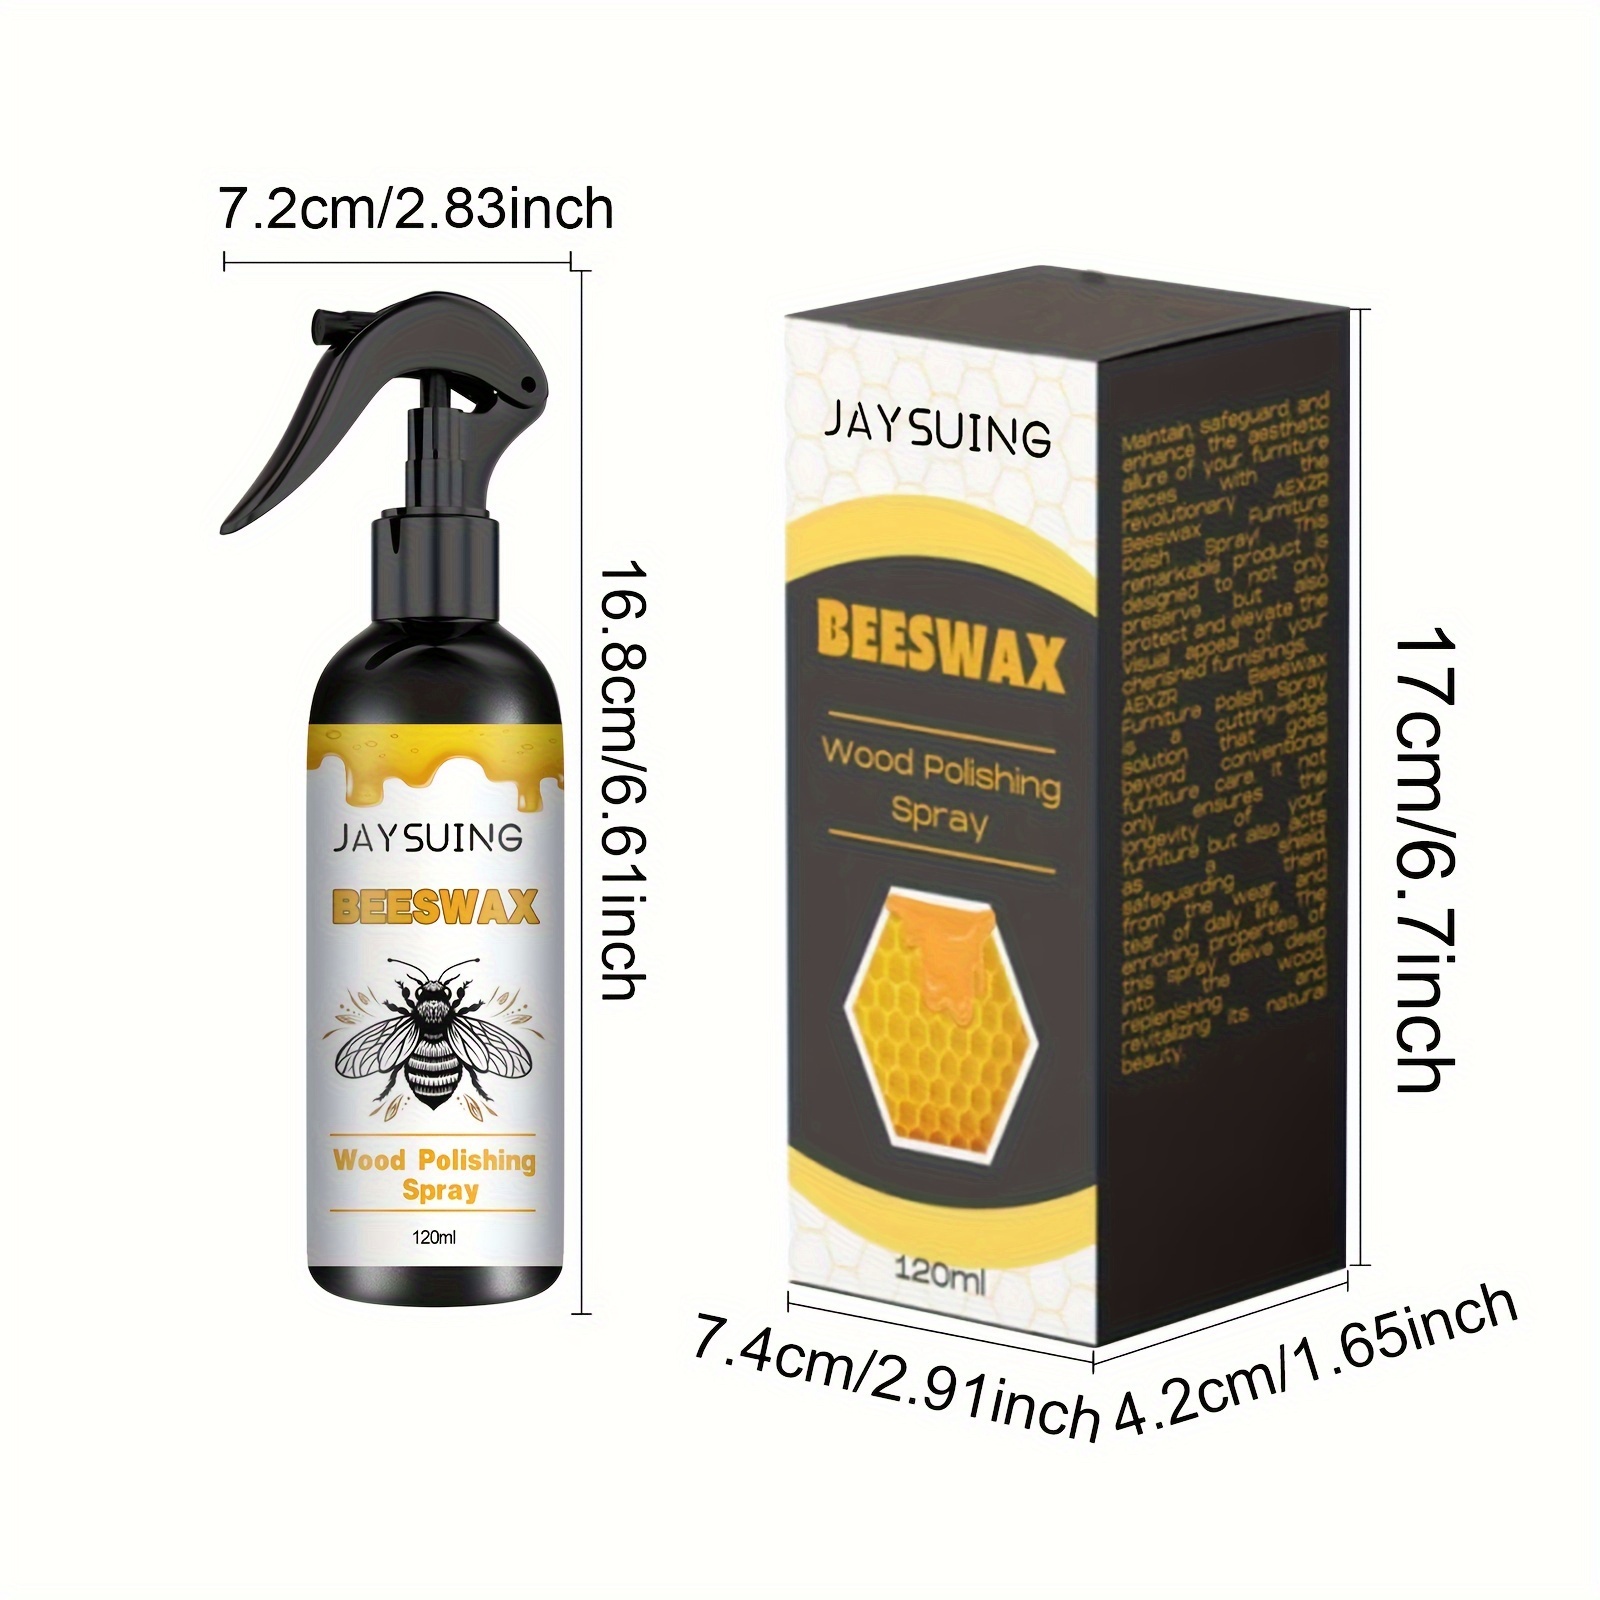 furniture polishing beeswax spray wood floor cleaning beeswax wood gloss resistant multifunctional agent wear resistant 0